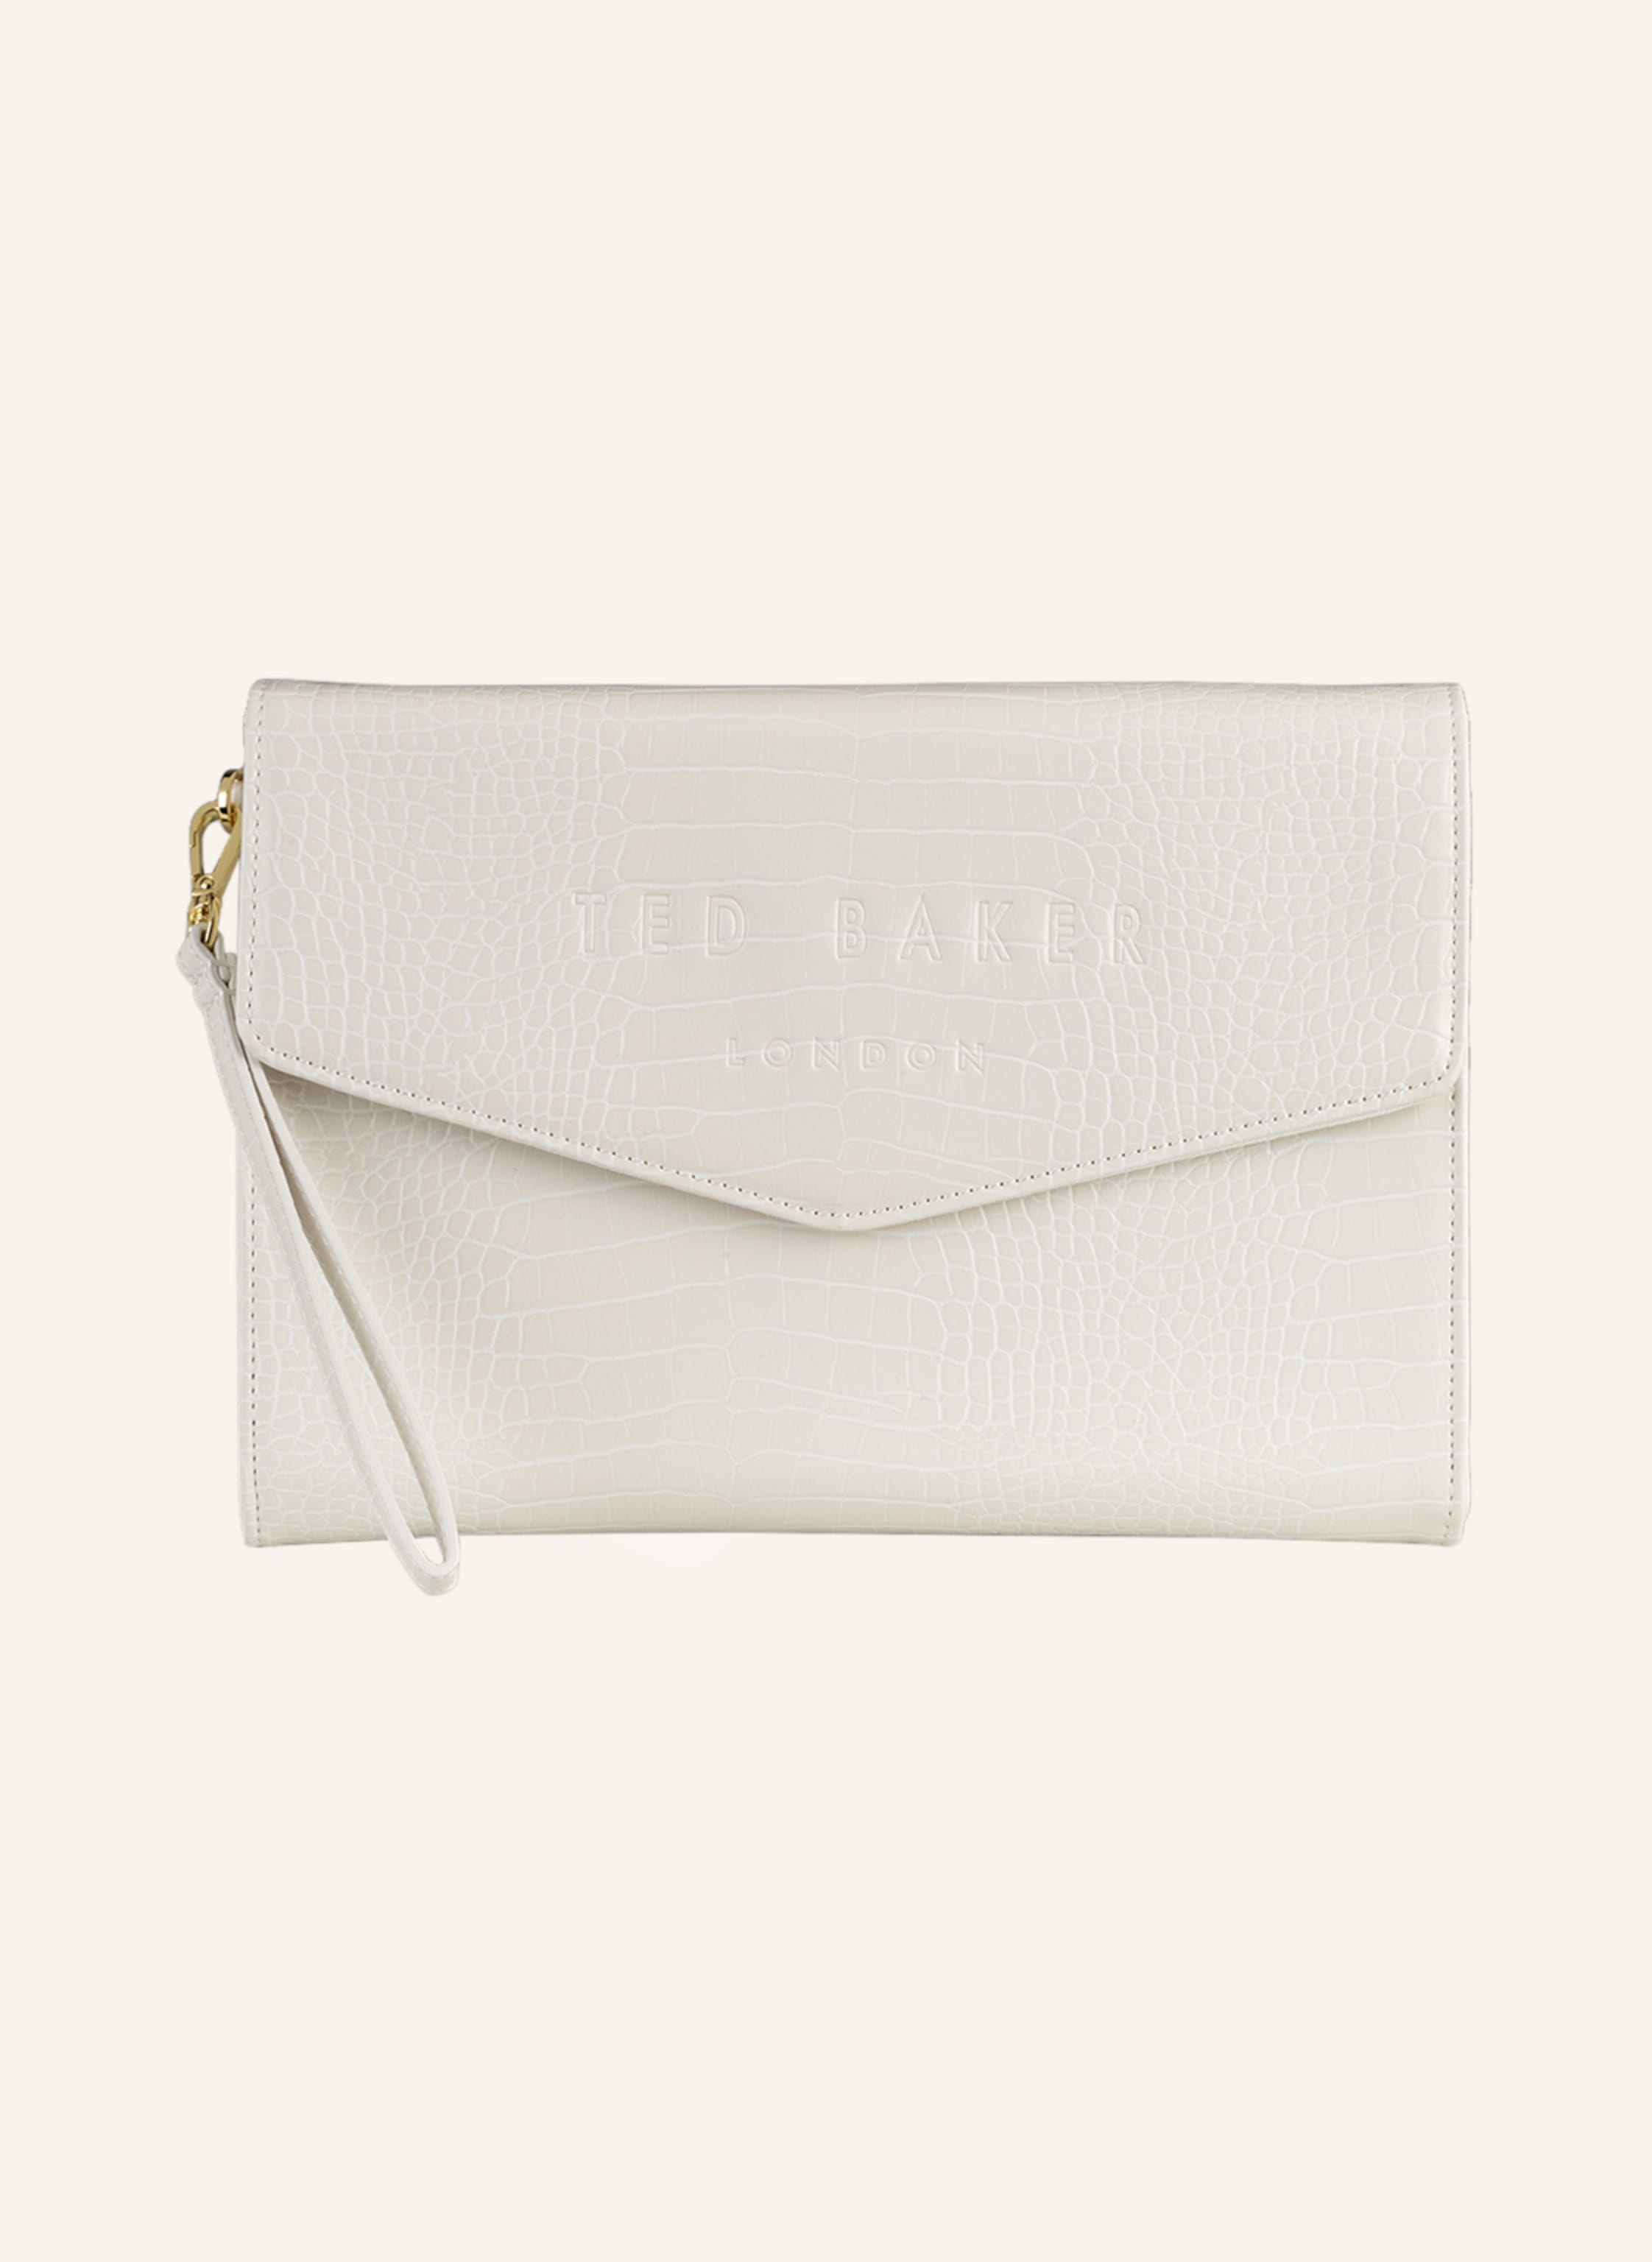 Ted Baker Leather Clutch Bag (white and fuschia)